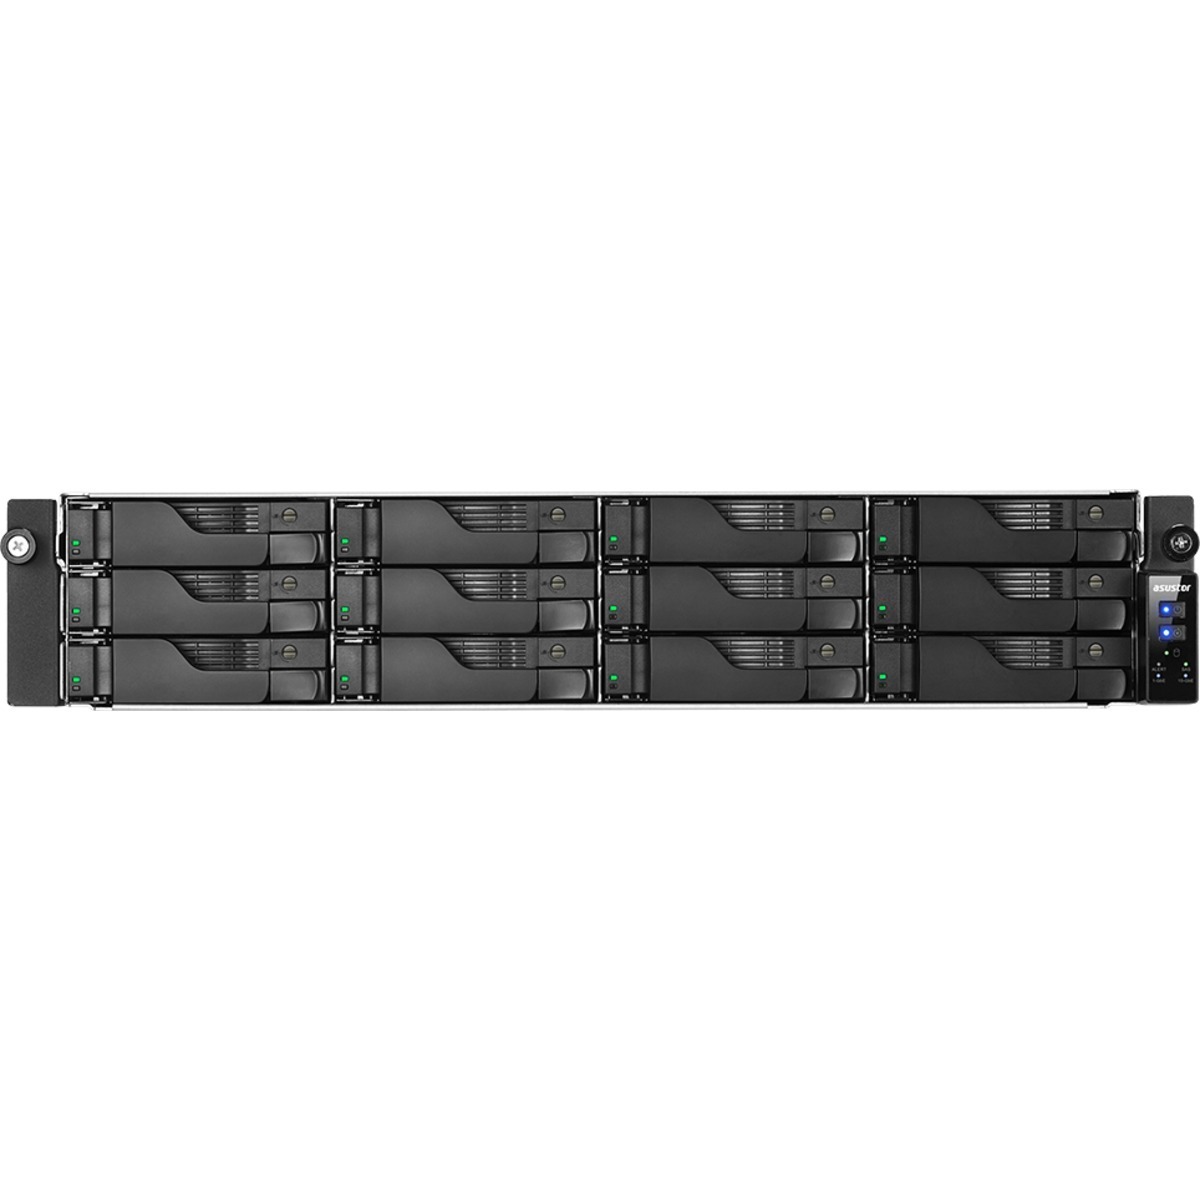 buy $4483 ASUSTOR AS7112RDX Lockerstor 12R Pro 24tb RackMount NAS - Network Attached Storage Device 12x2000gb Seagate BarraCuda ST2000DM008 3.5 7200rpm SATA 6Gb/s HDD CONSUMER Class Drives Installed - Burn-In Tested - ON SALE - nas headquarters buy network attached storage server device das new raid-5 free shipping usa AS7112RDX Lockerstor 12R Pro